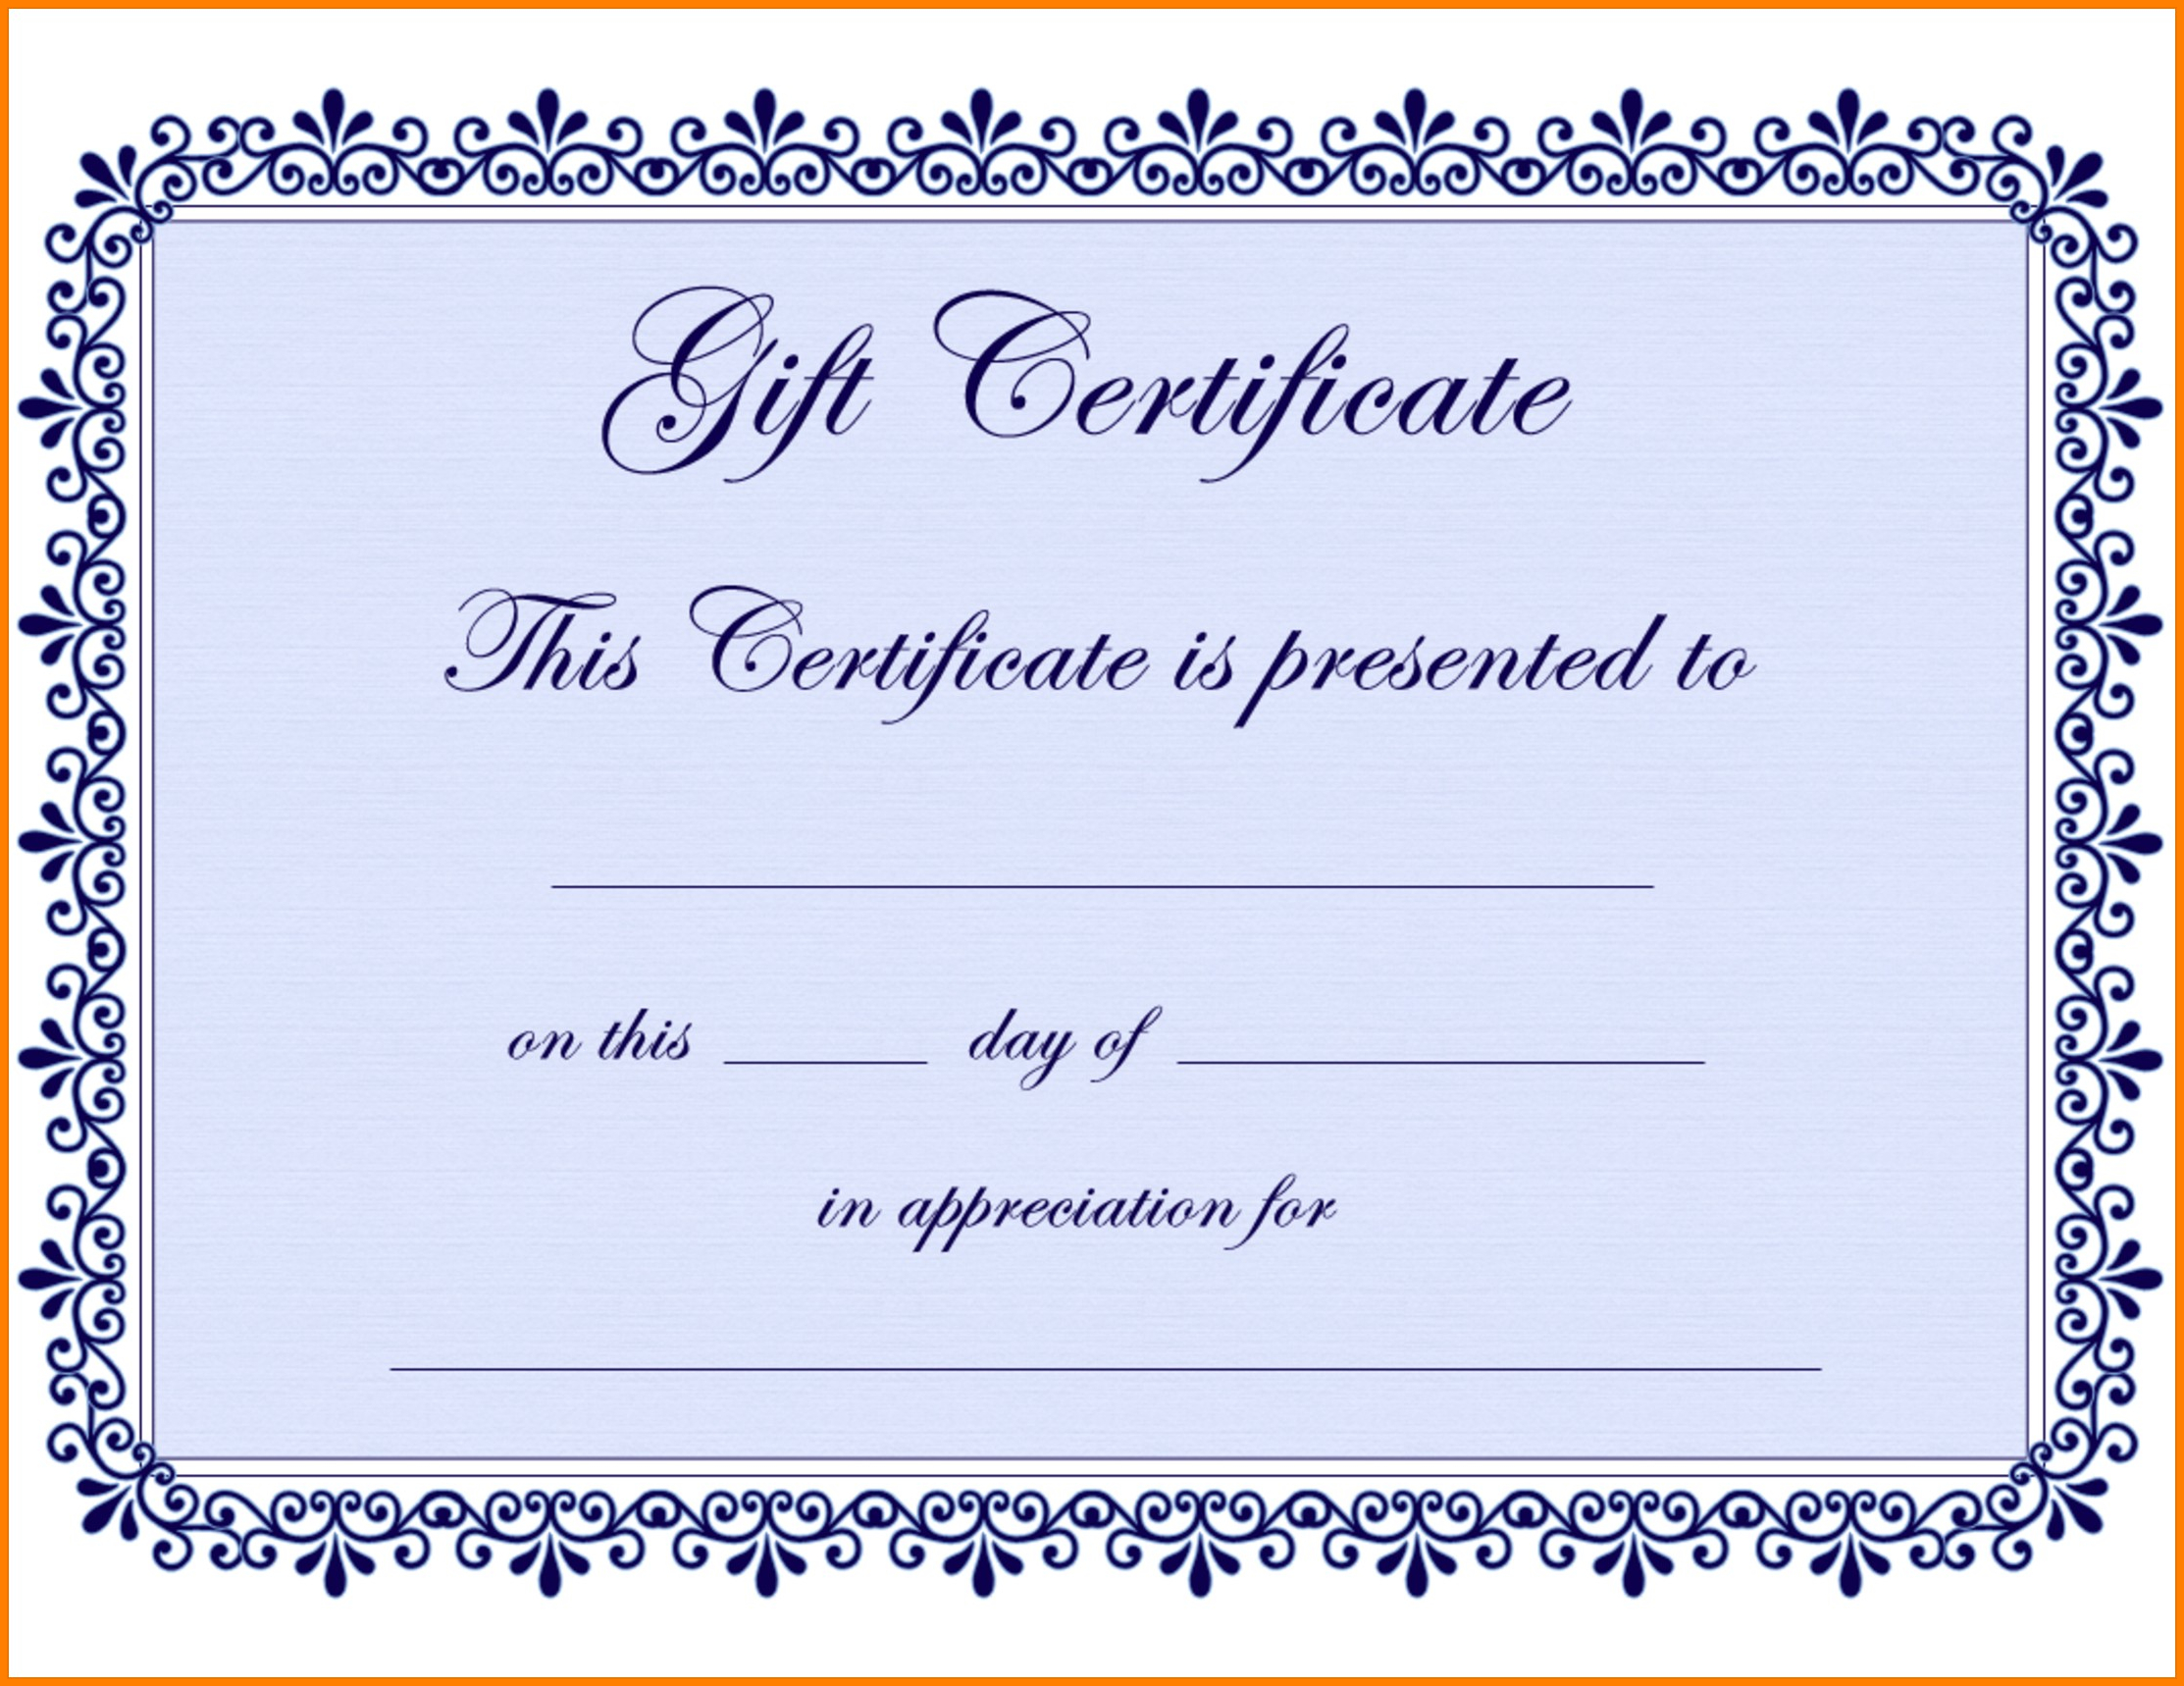 Gift Certificate Template Png | Certificatetemplategift Within Free Certificate Templates For Word 2007